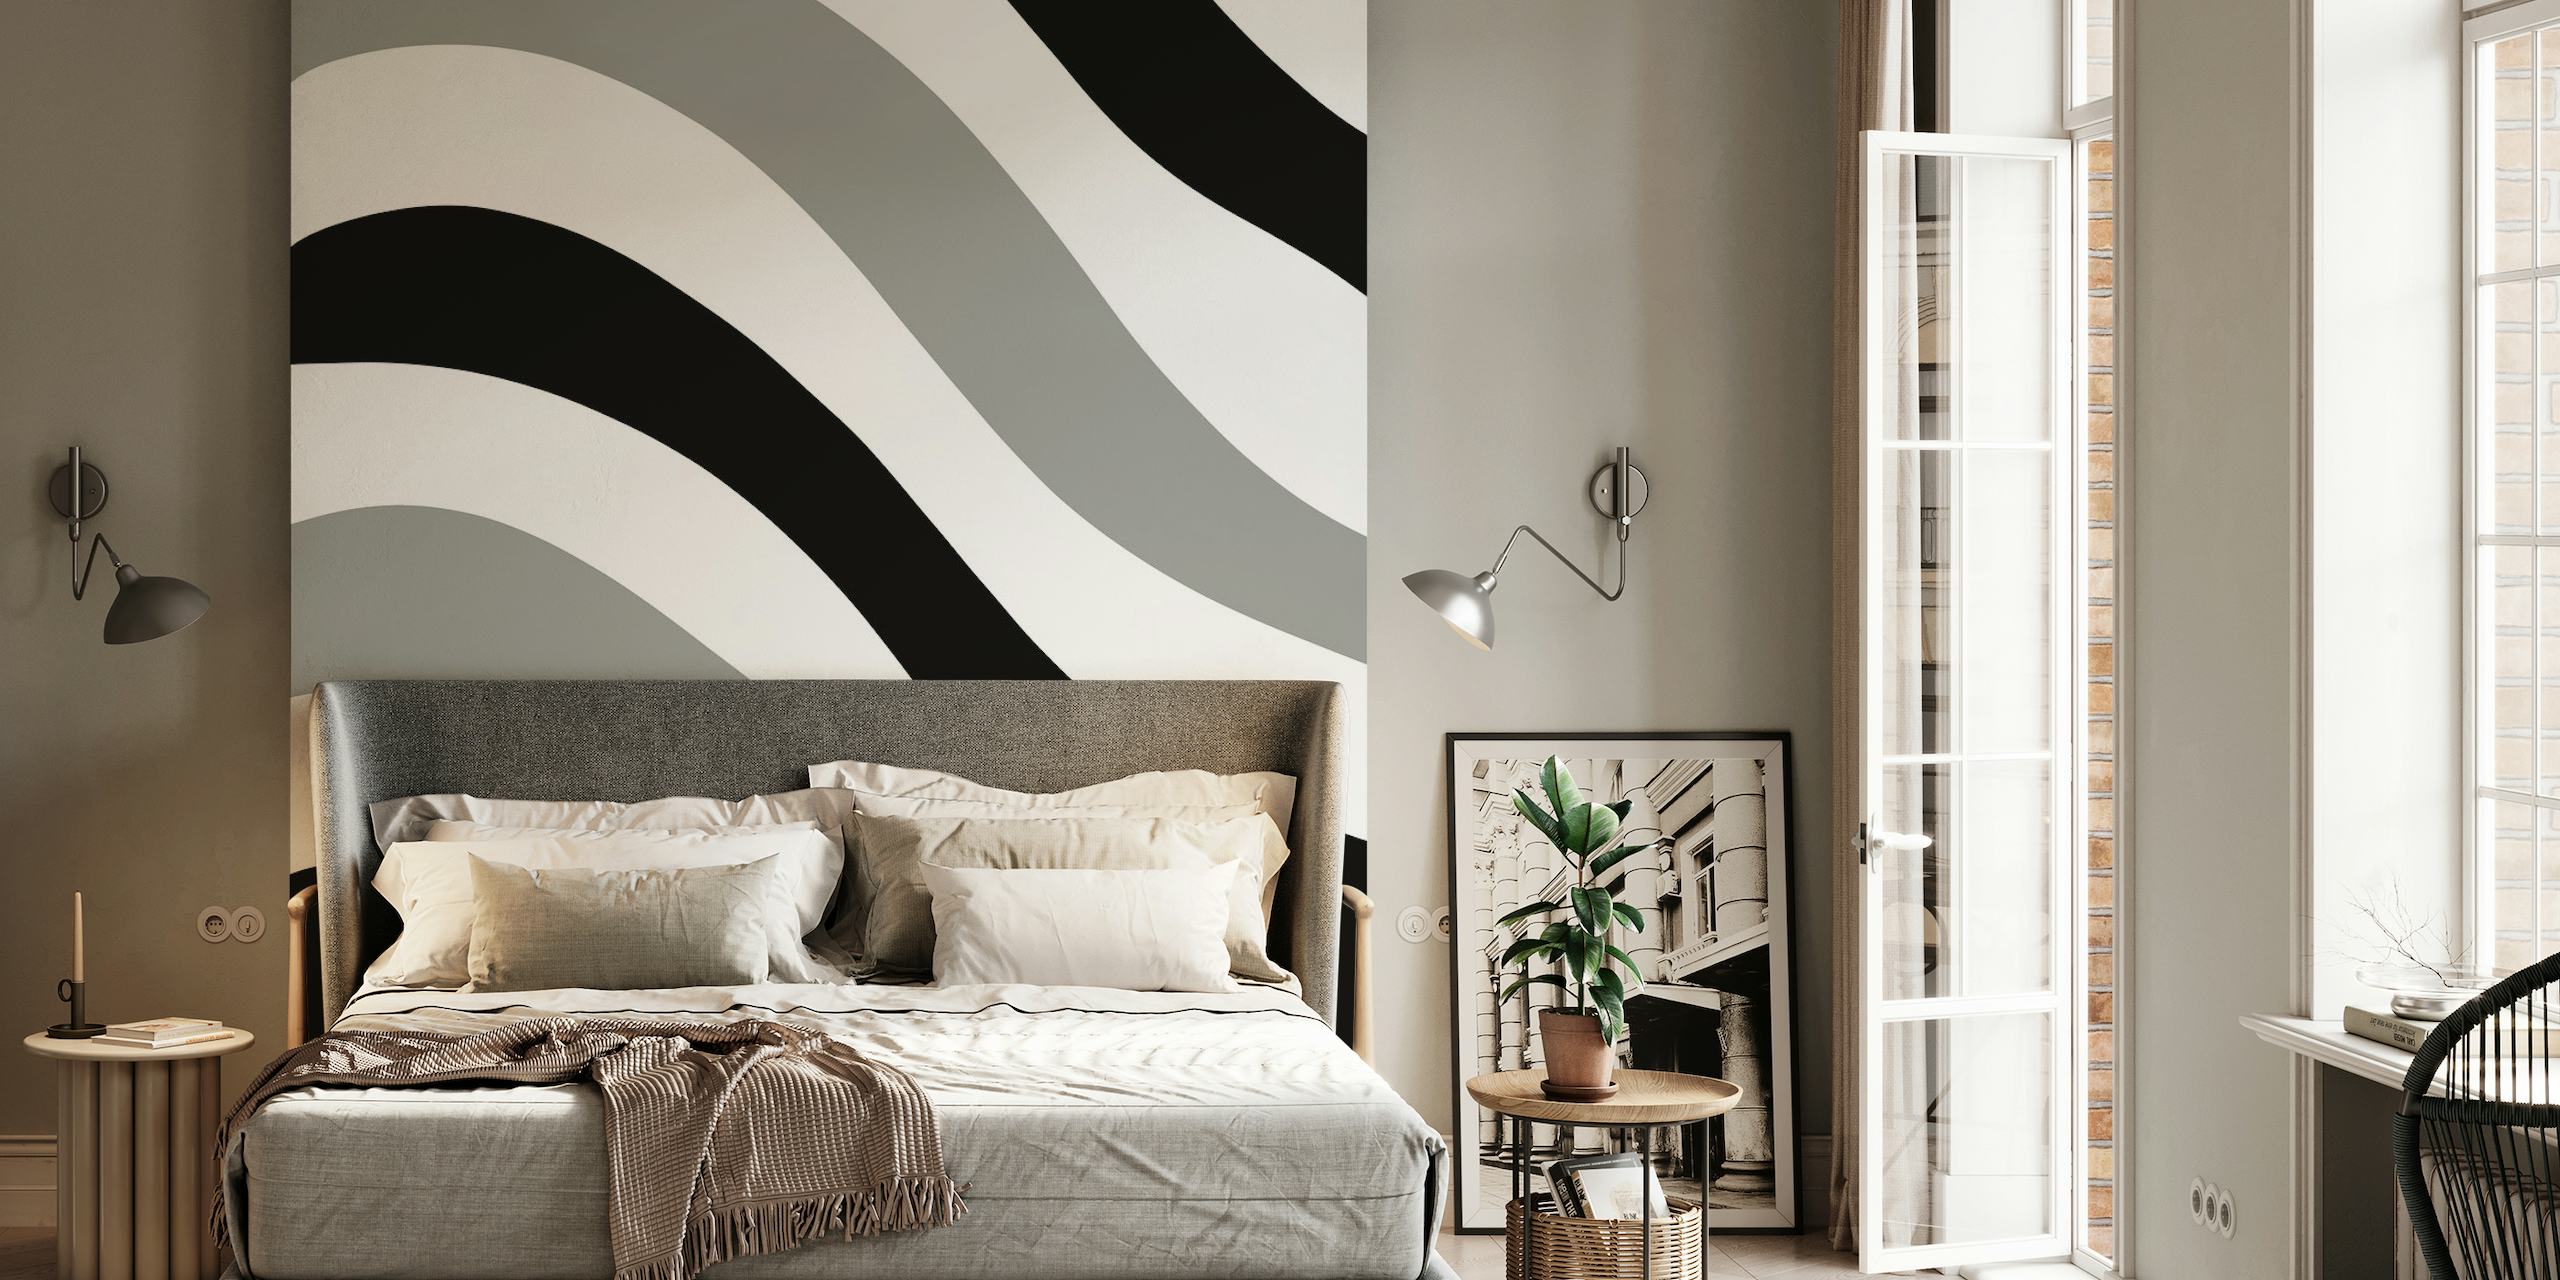 Black and white retro summer wave pattern wall mural